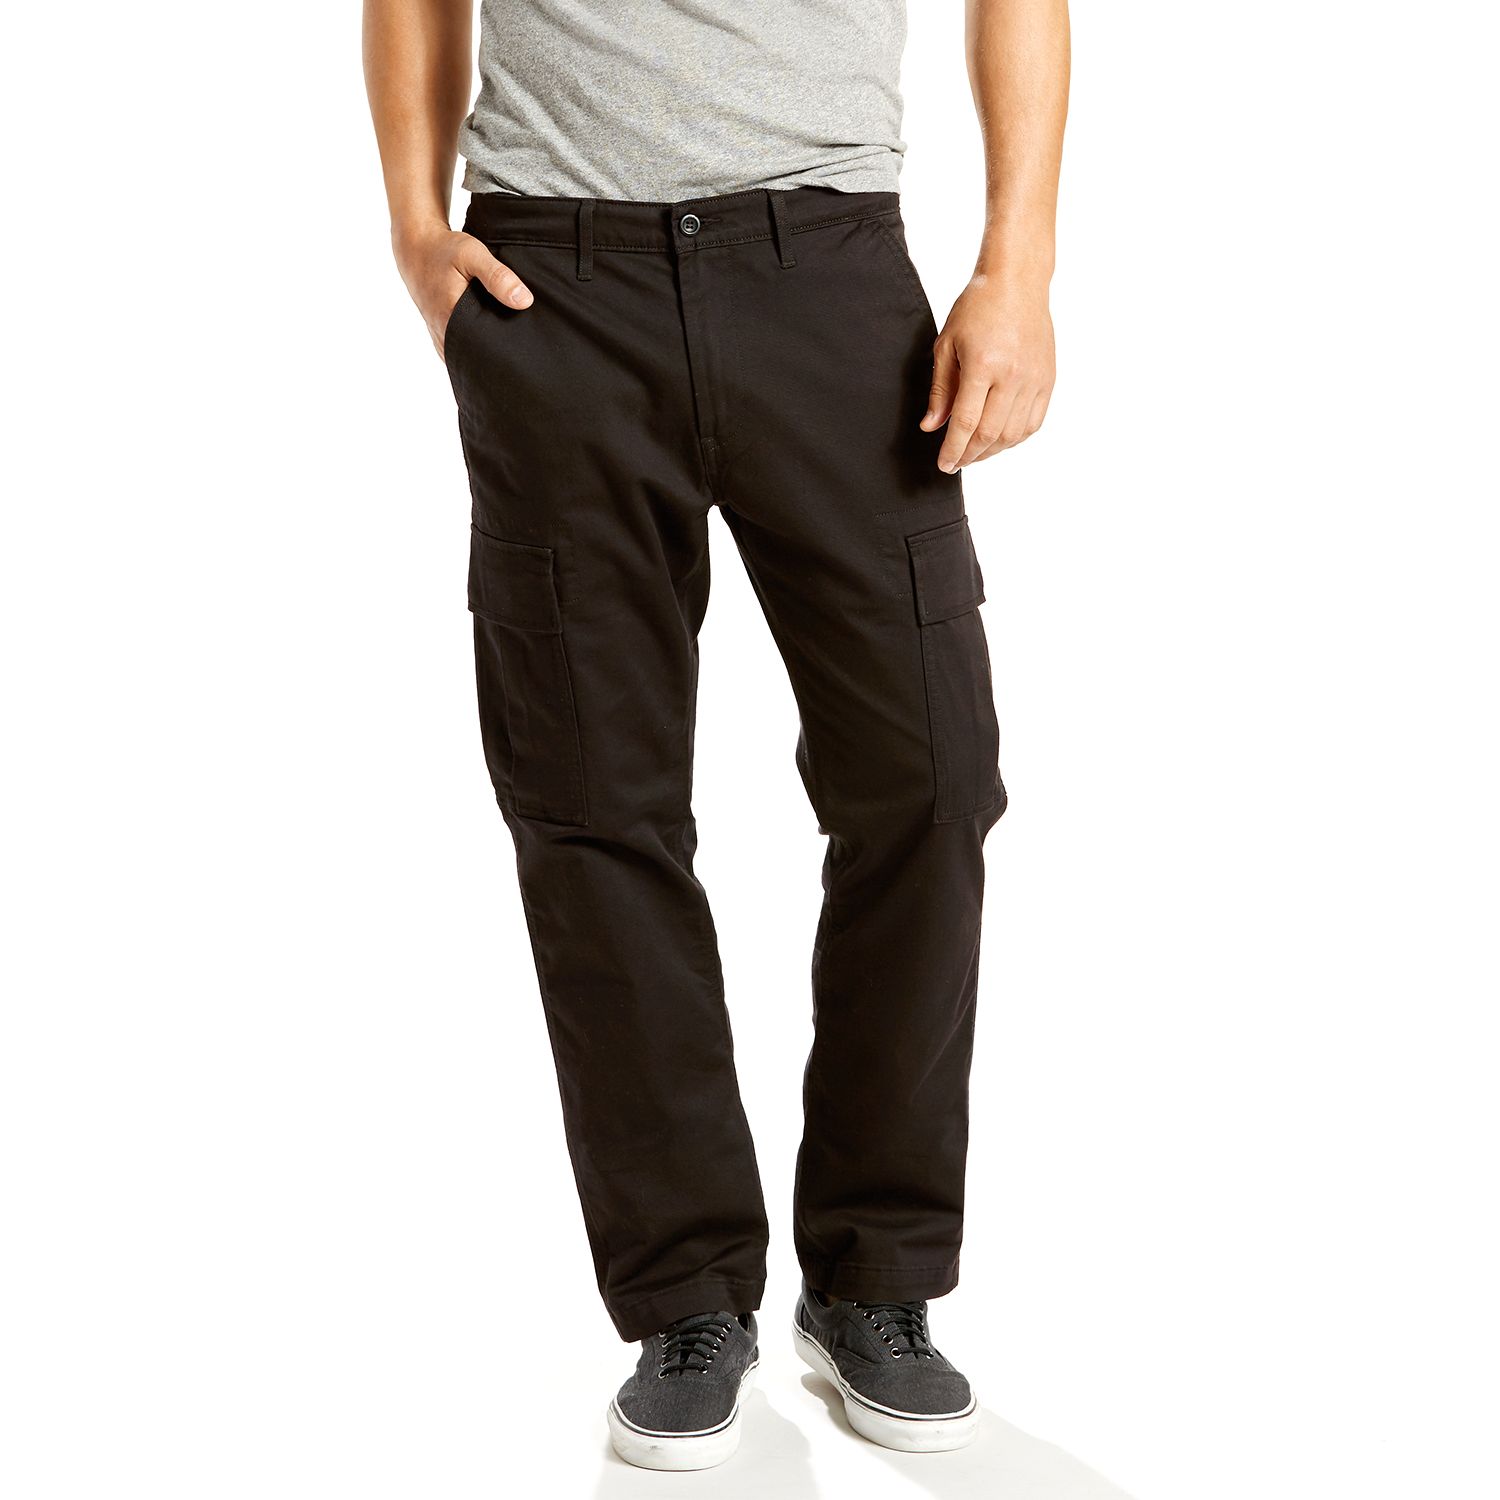 levi's men's 541 athletic fit chino pant